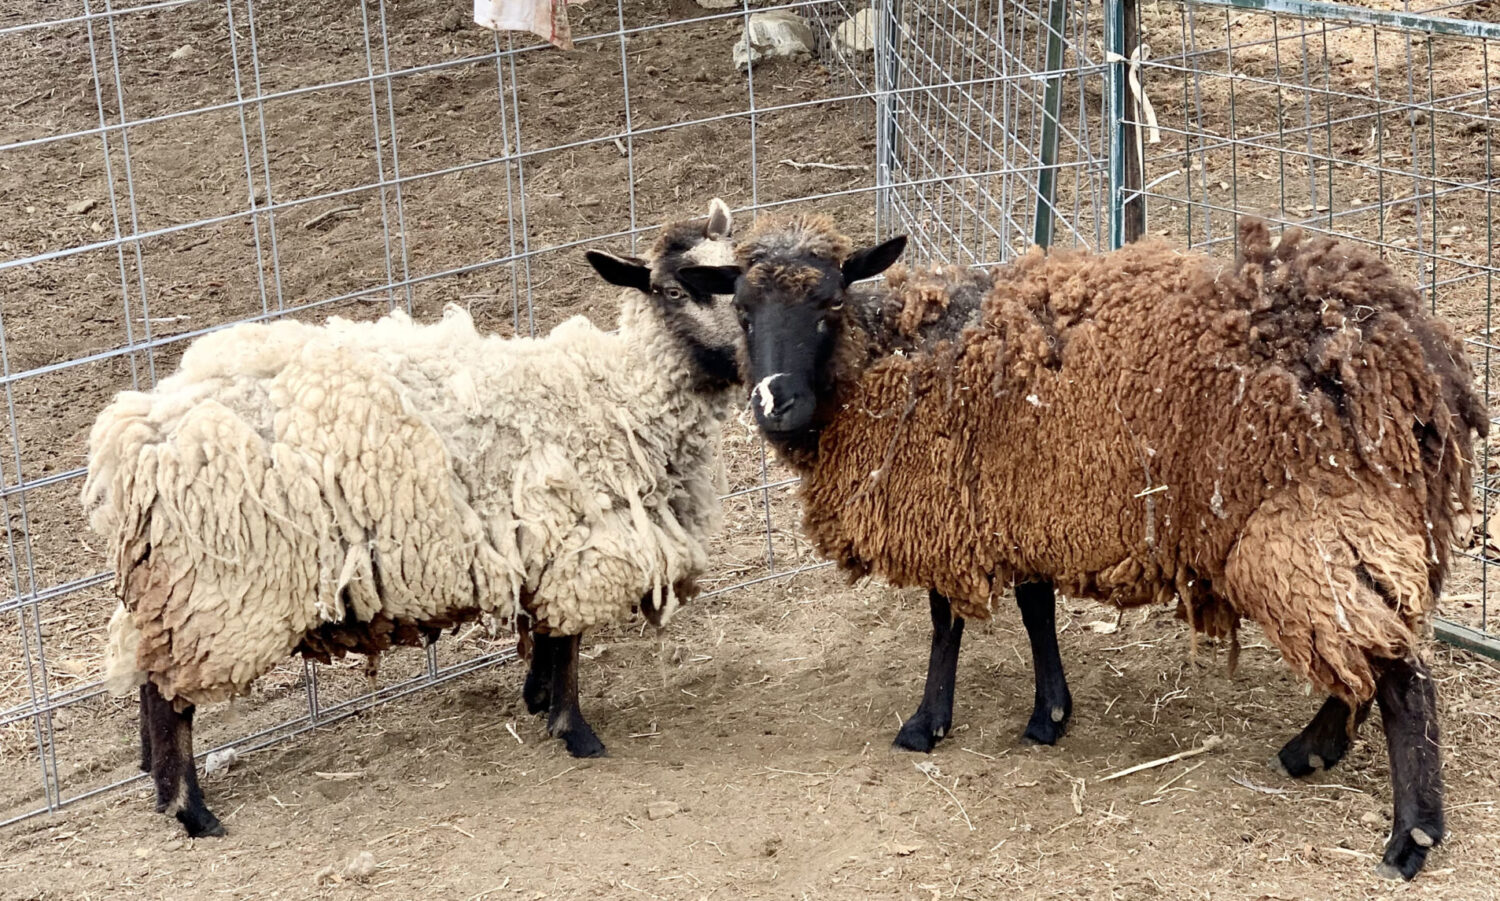 Two sheep standing next to each other in a pen.